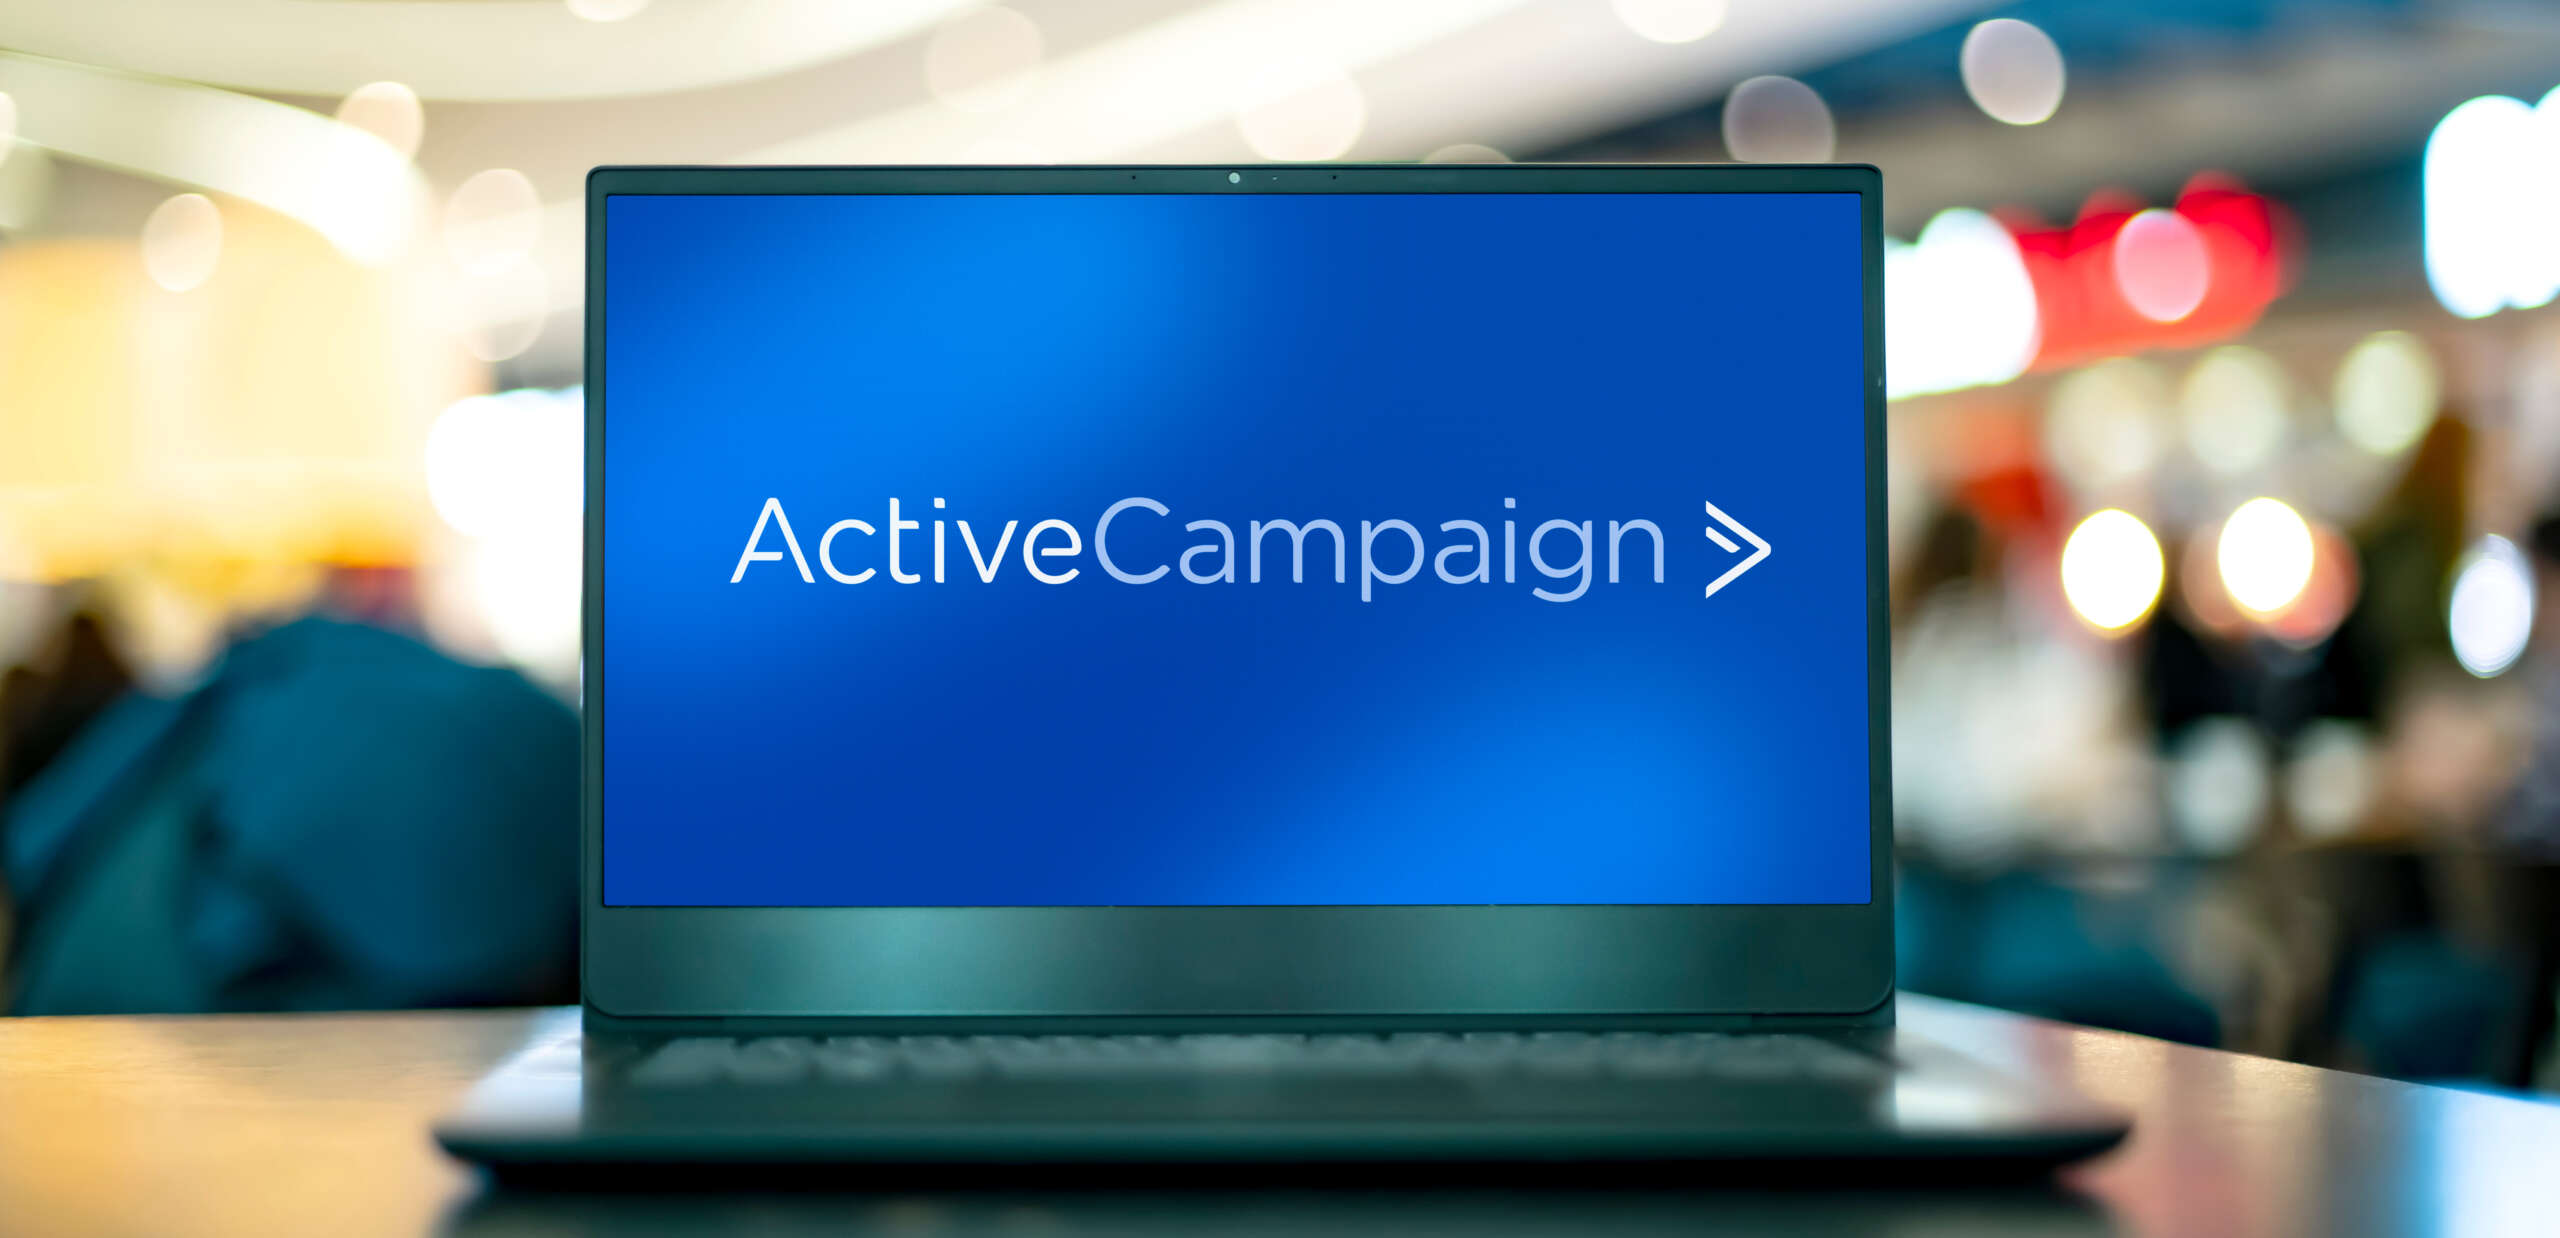 ActiveCampaign Review and Pricing - A Comprehensive Email Marketing & Automation Tool Review